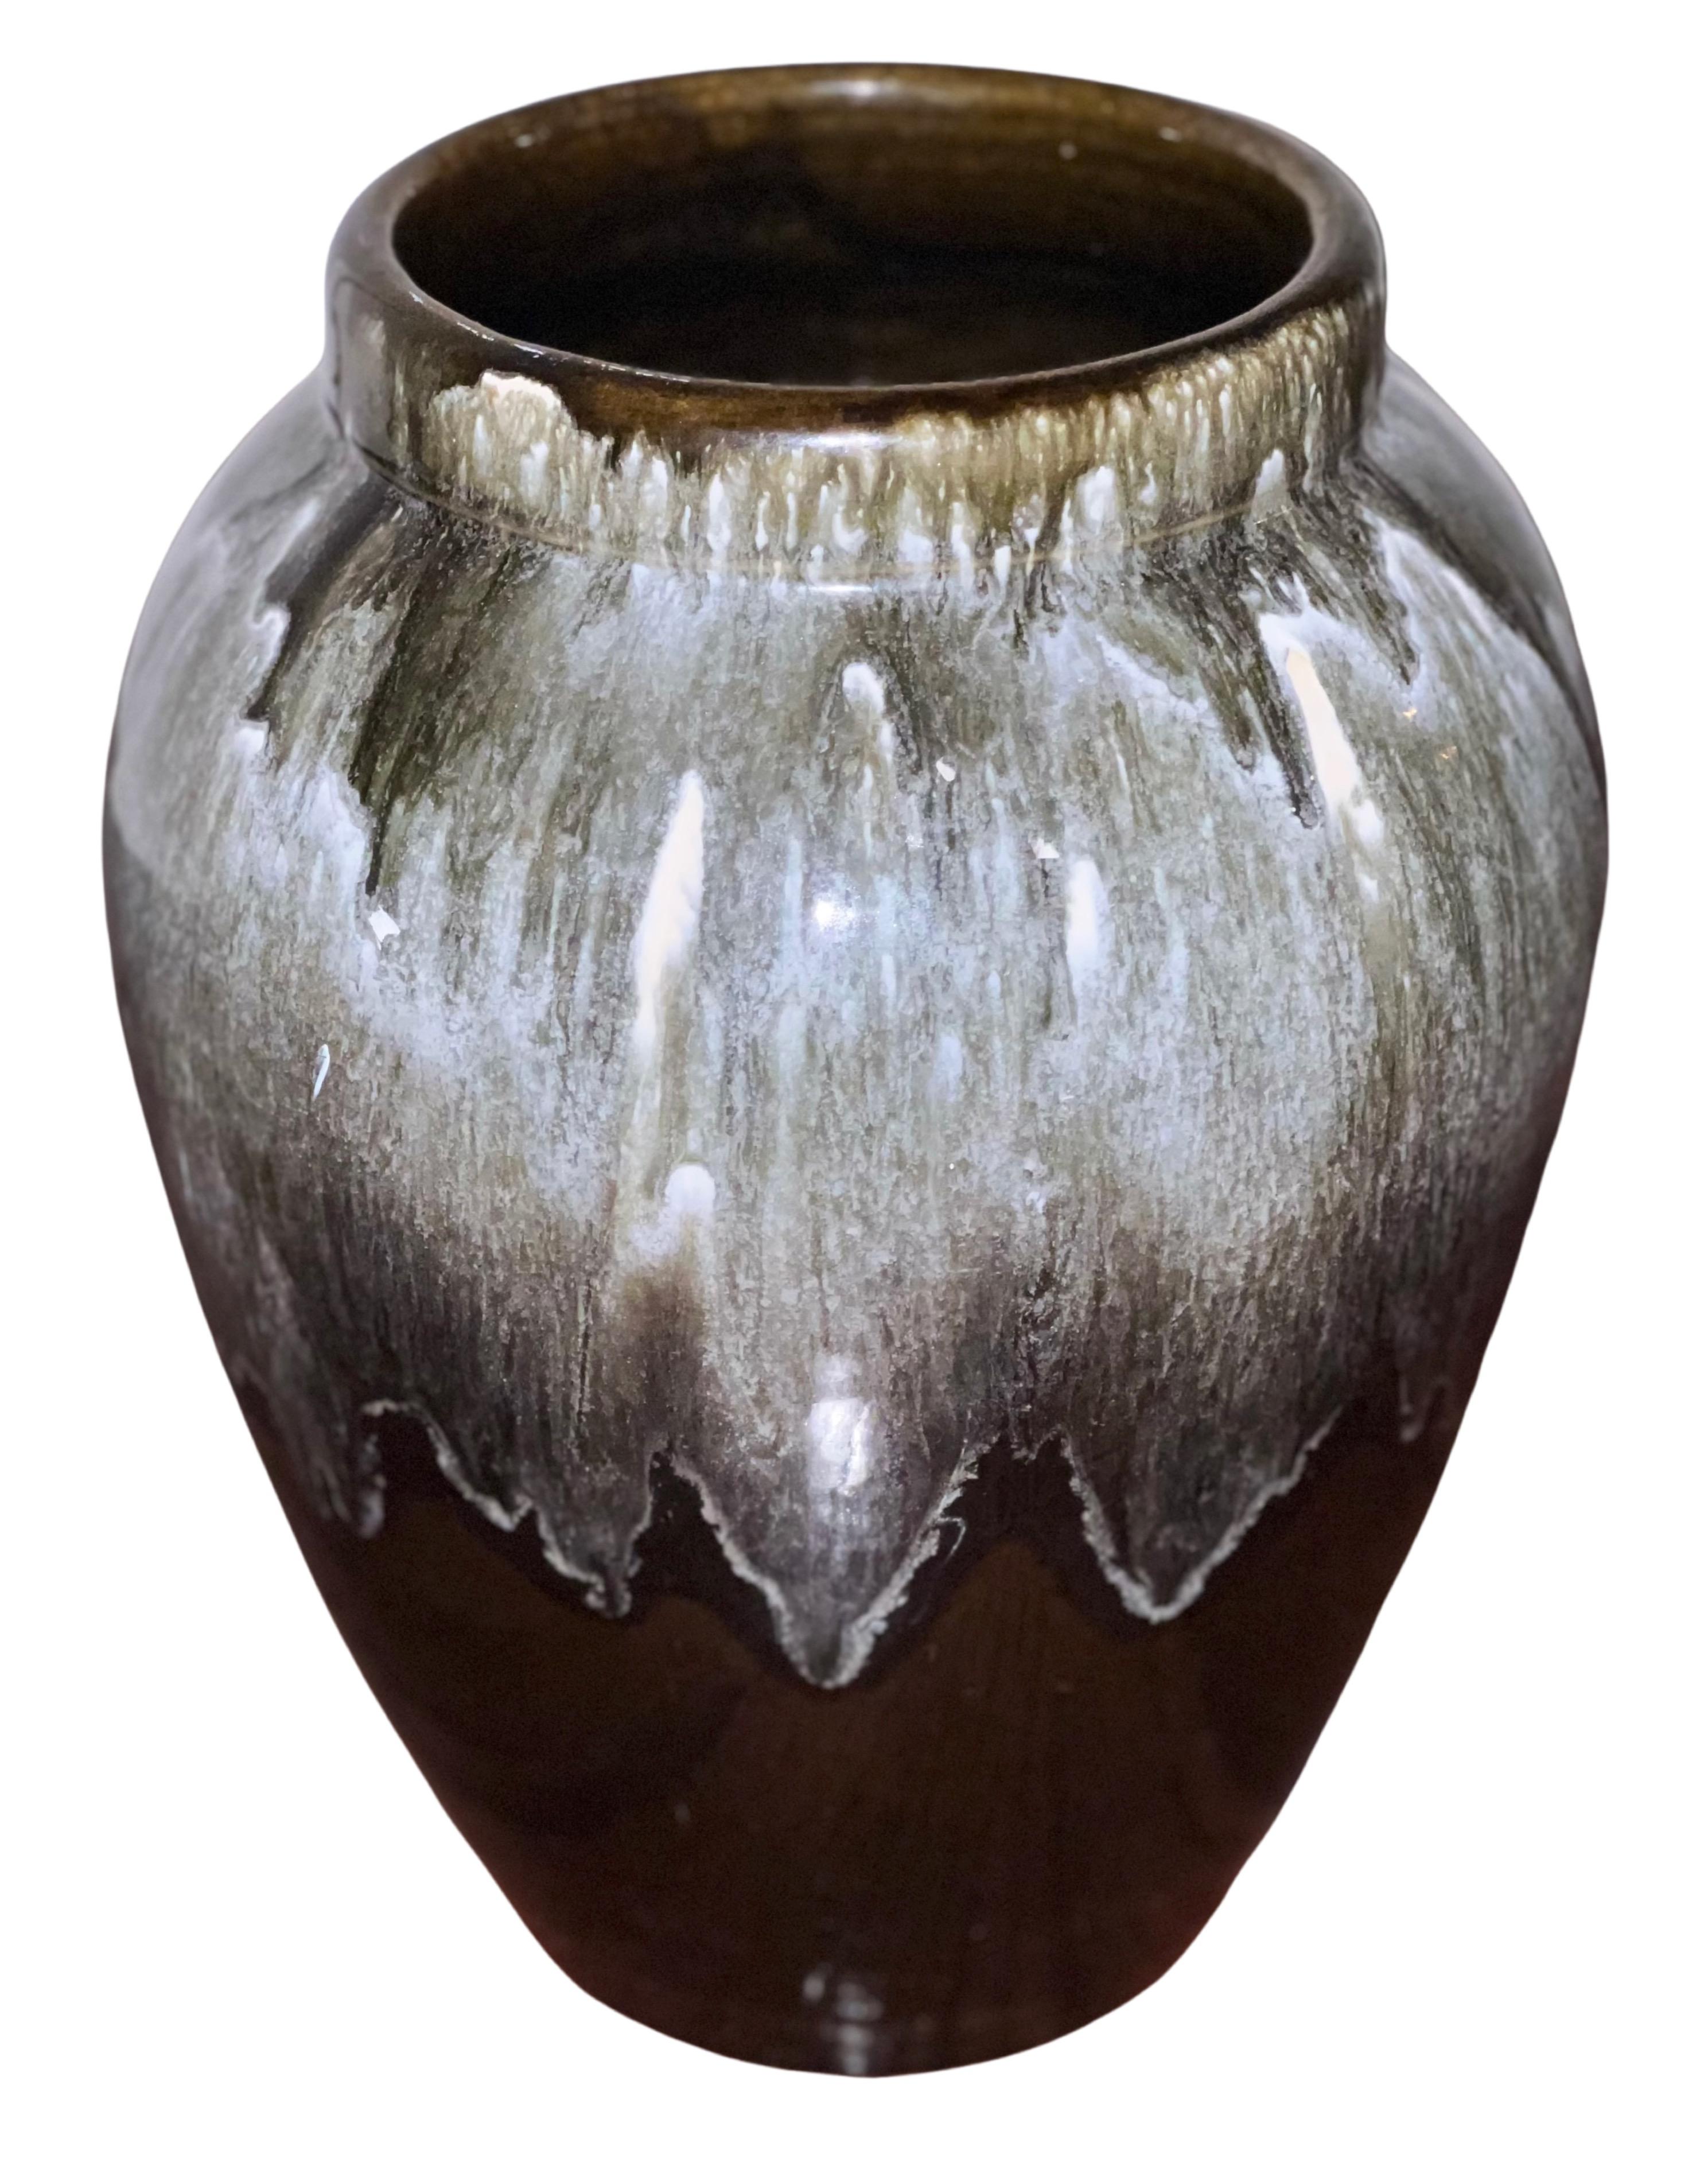 Beautiful early 20th century drip glaze planter. Handcrafted during WWI, the planter is marked U.S.A. on the bottom to denote country of origin as some studios chose to express their patriotism. 

The planter features a drip glaze in muted tones